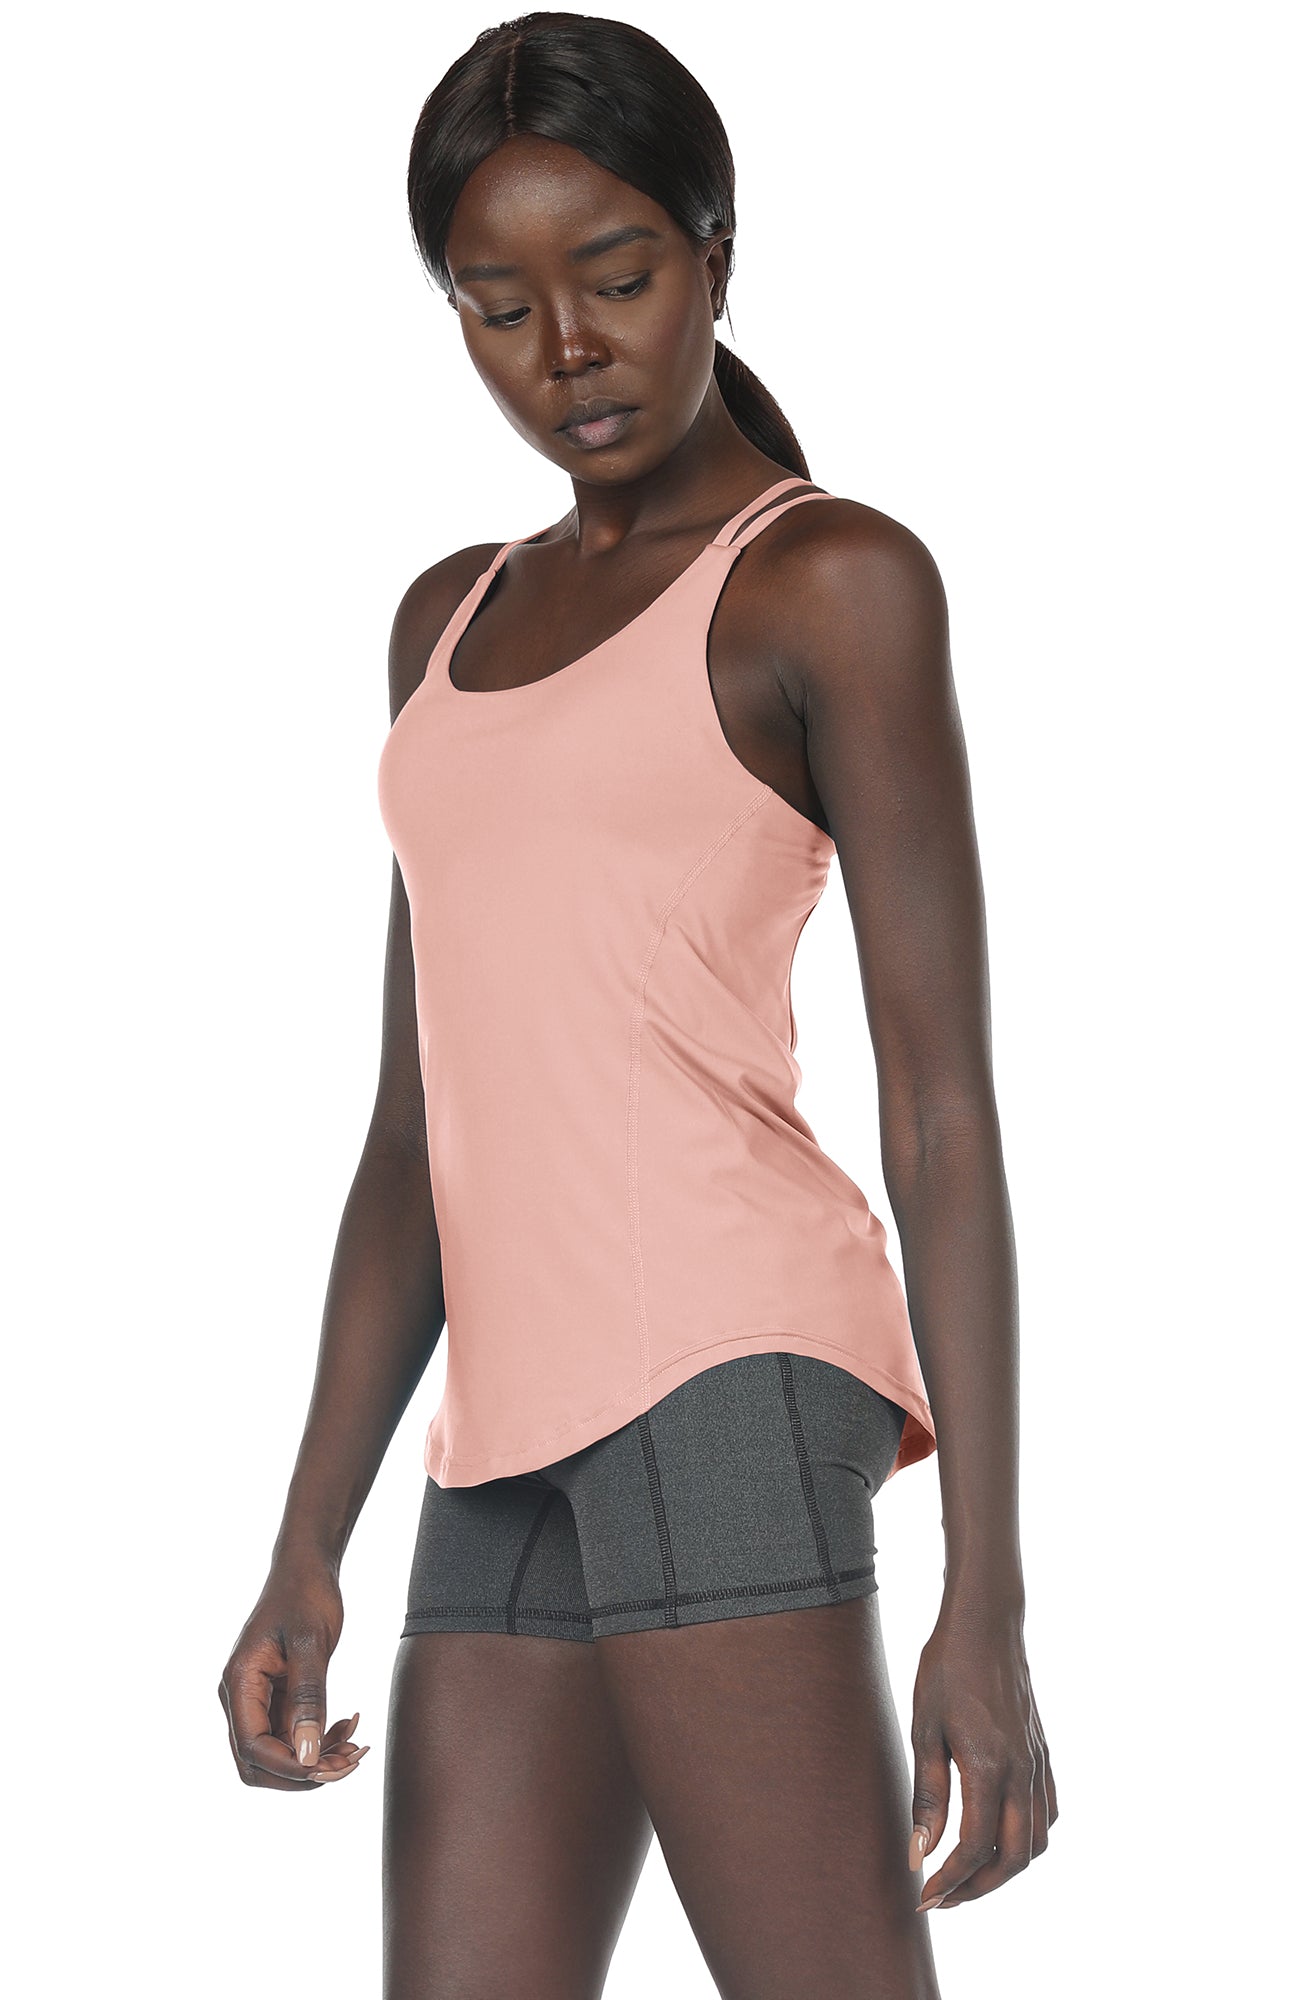 Lemedy Strappy Back Tank Top for Women with Built in Bra Workout